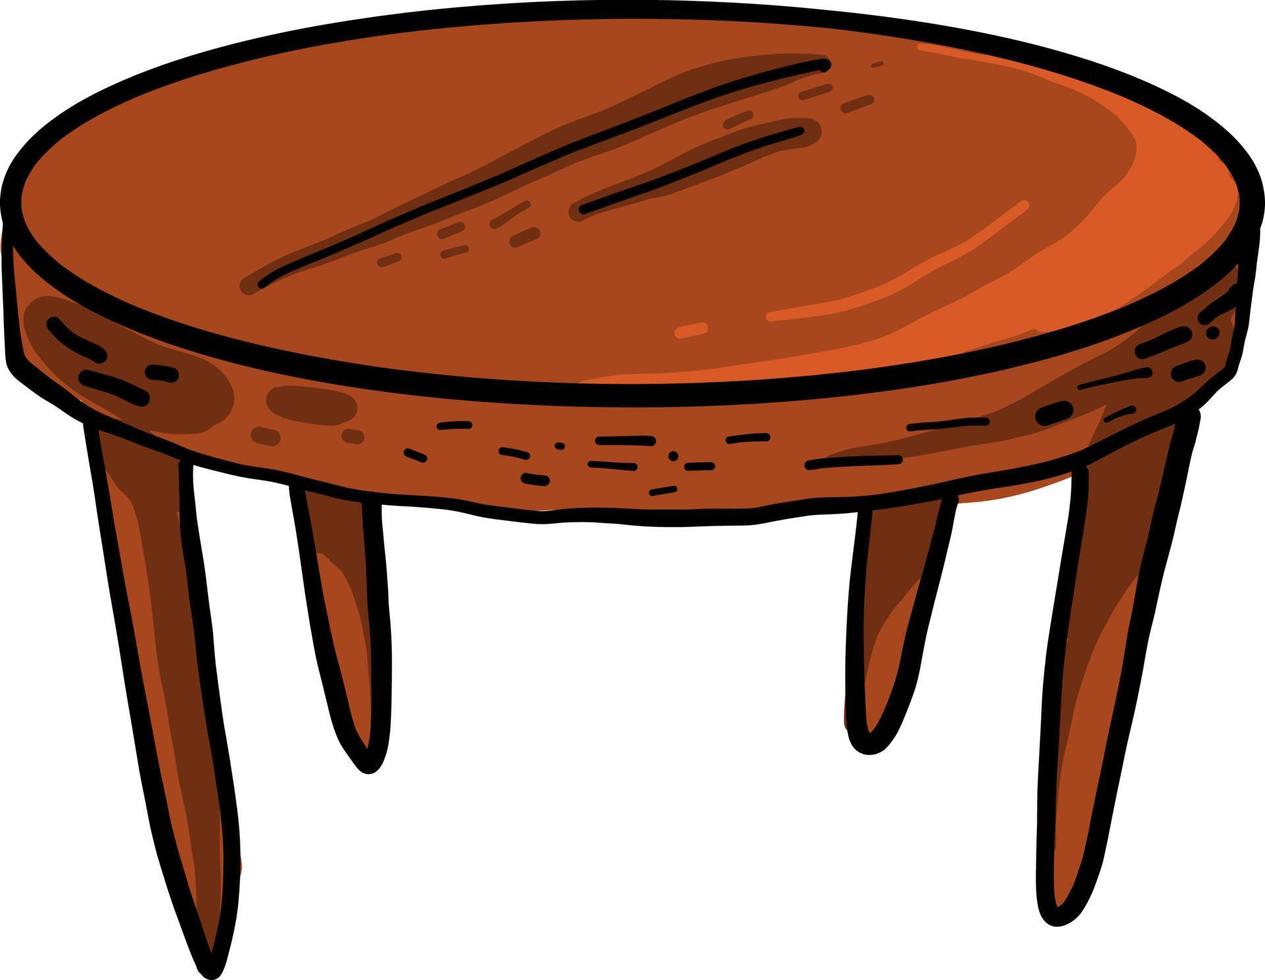 Wooden round table, illustration, vector on white background